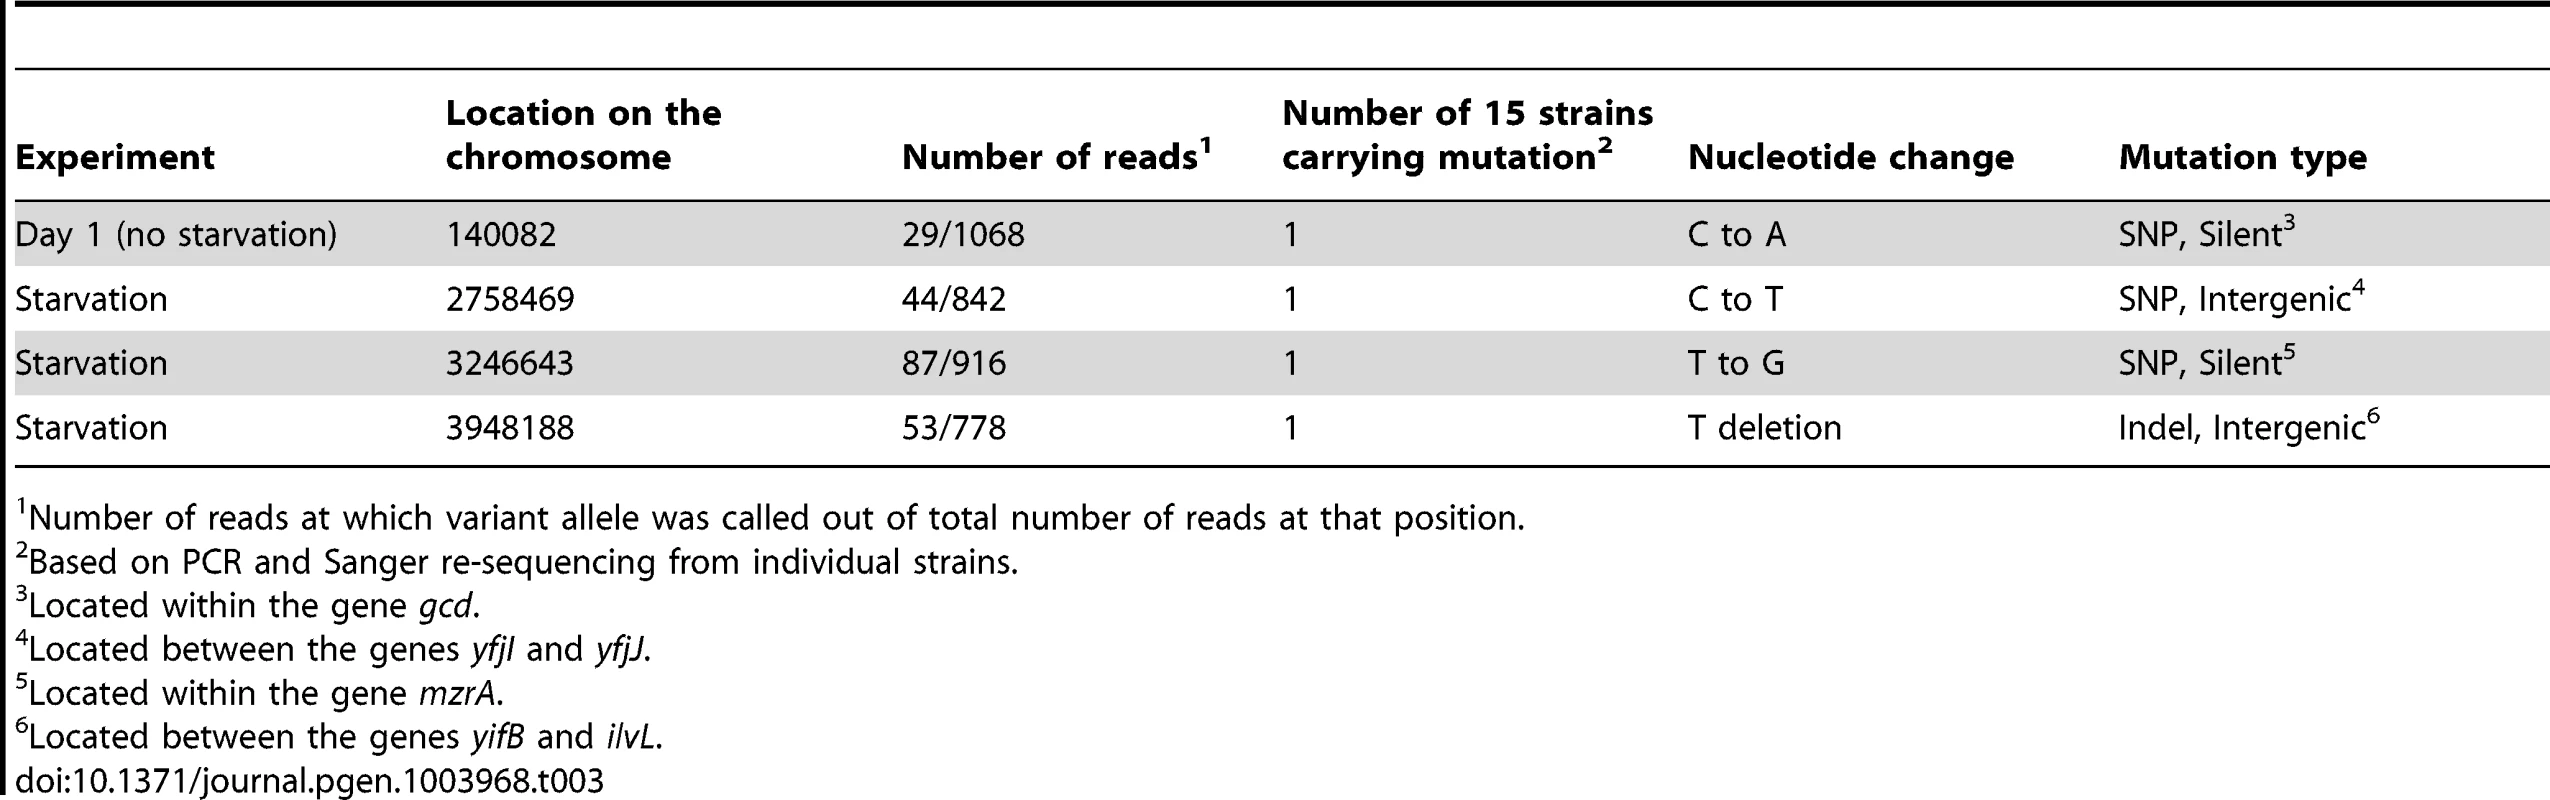 Mutations identified in 15 non-starved and 15 starved isolates, untested for resistance.